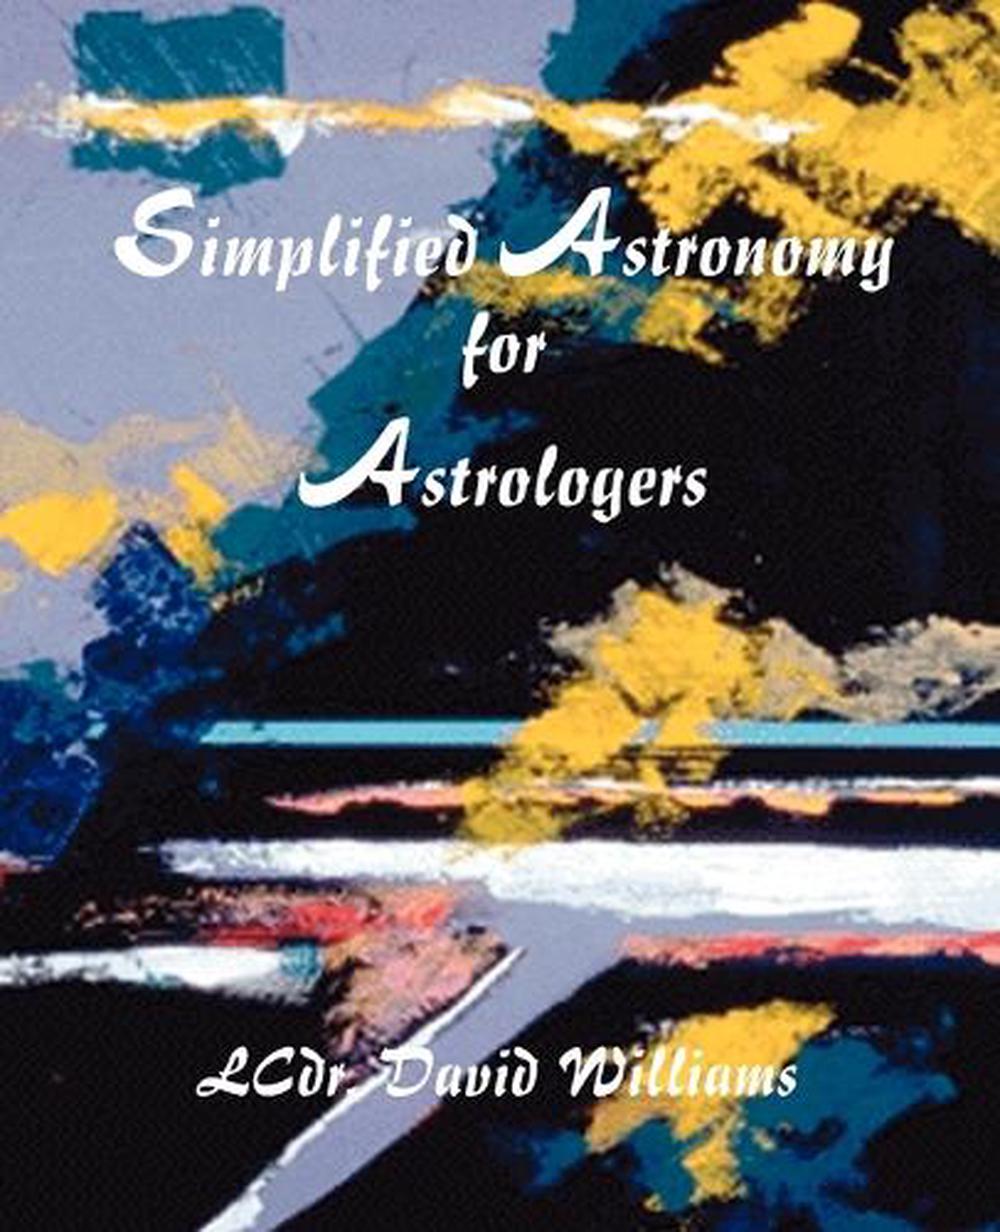 childrens book about famous astrologers